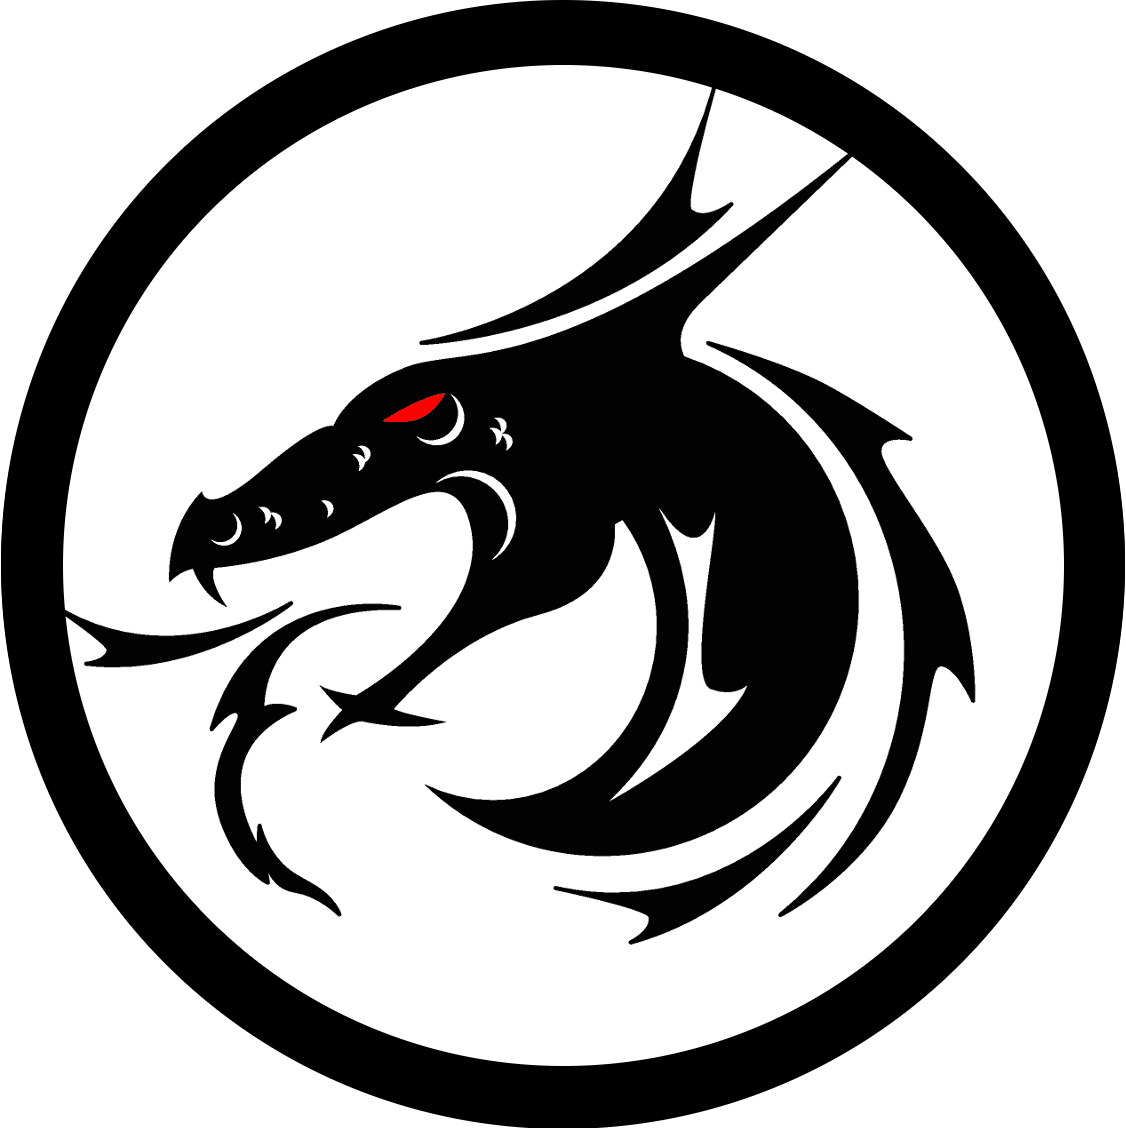 Black Dragon Logo - Pin by Tony Valente on cool stuff cool cars in 2019 | Nuevas, Perfiles